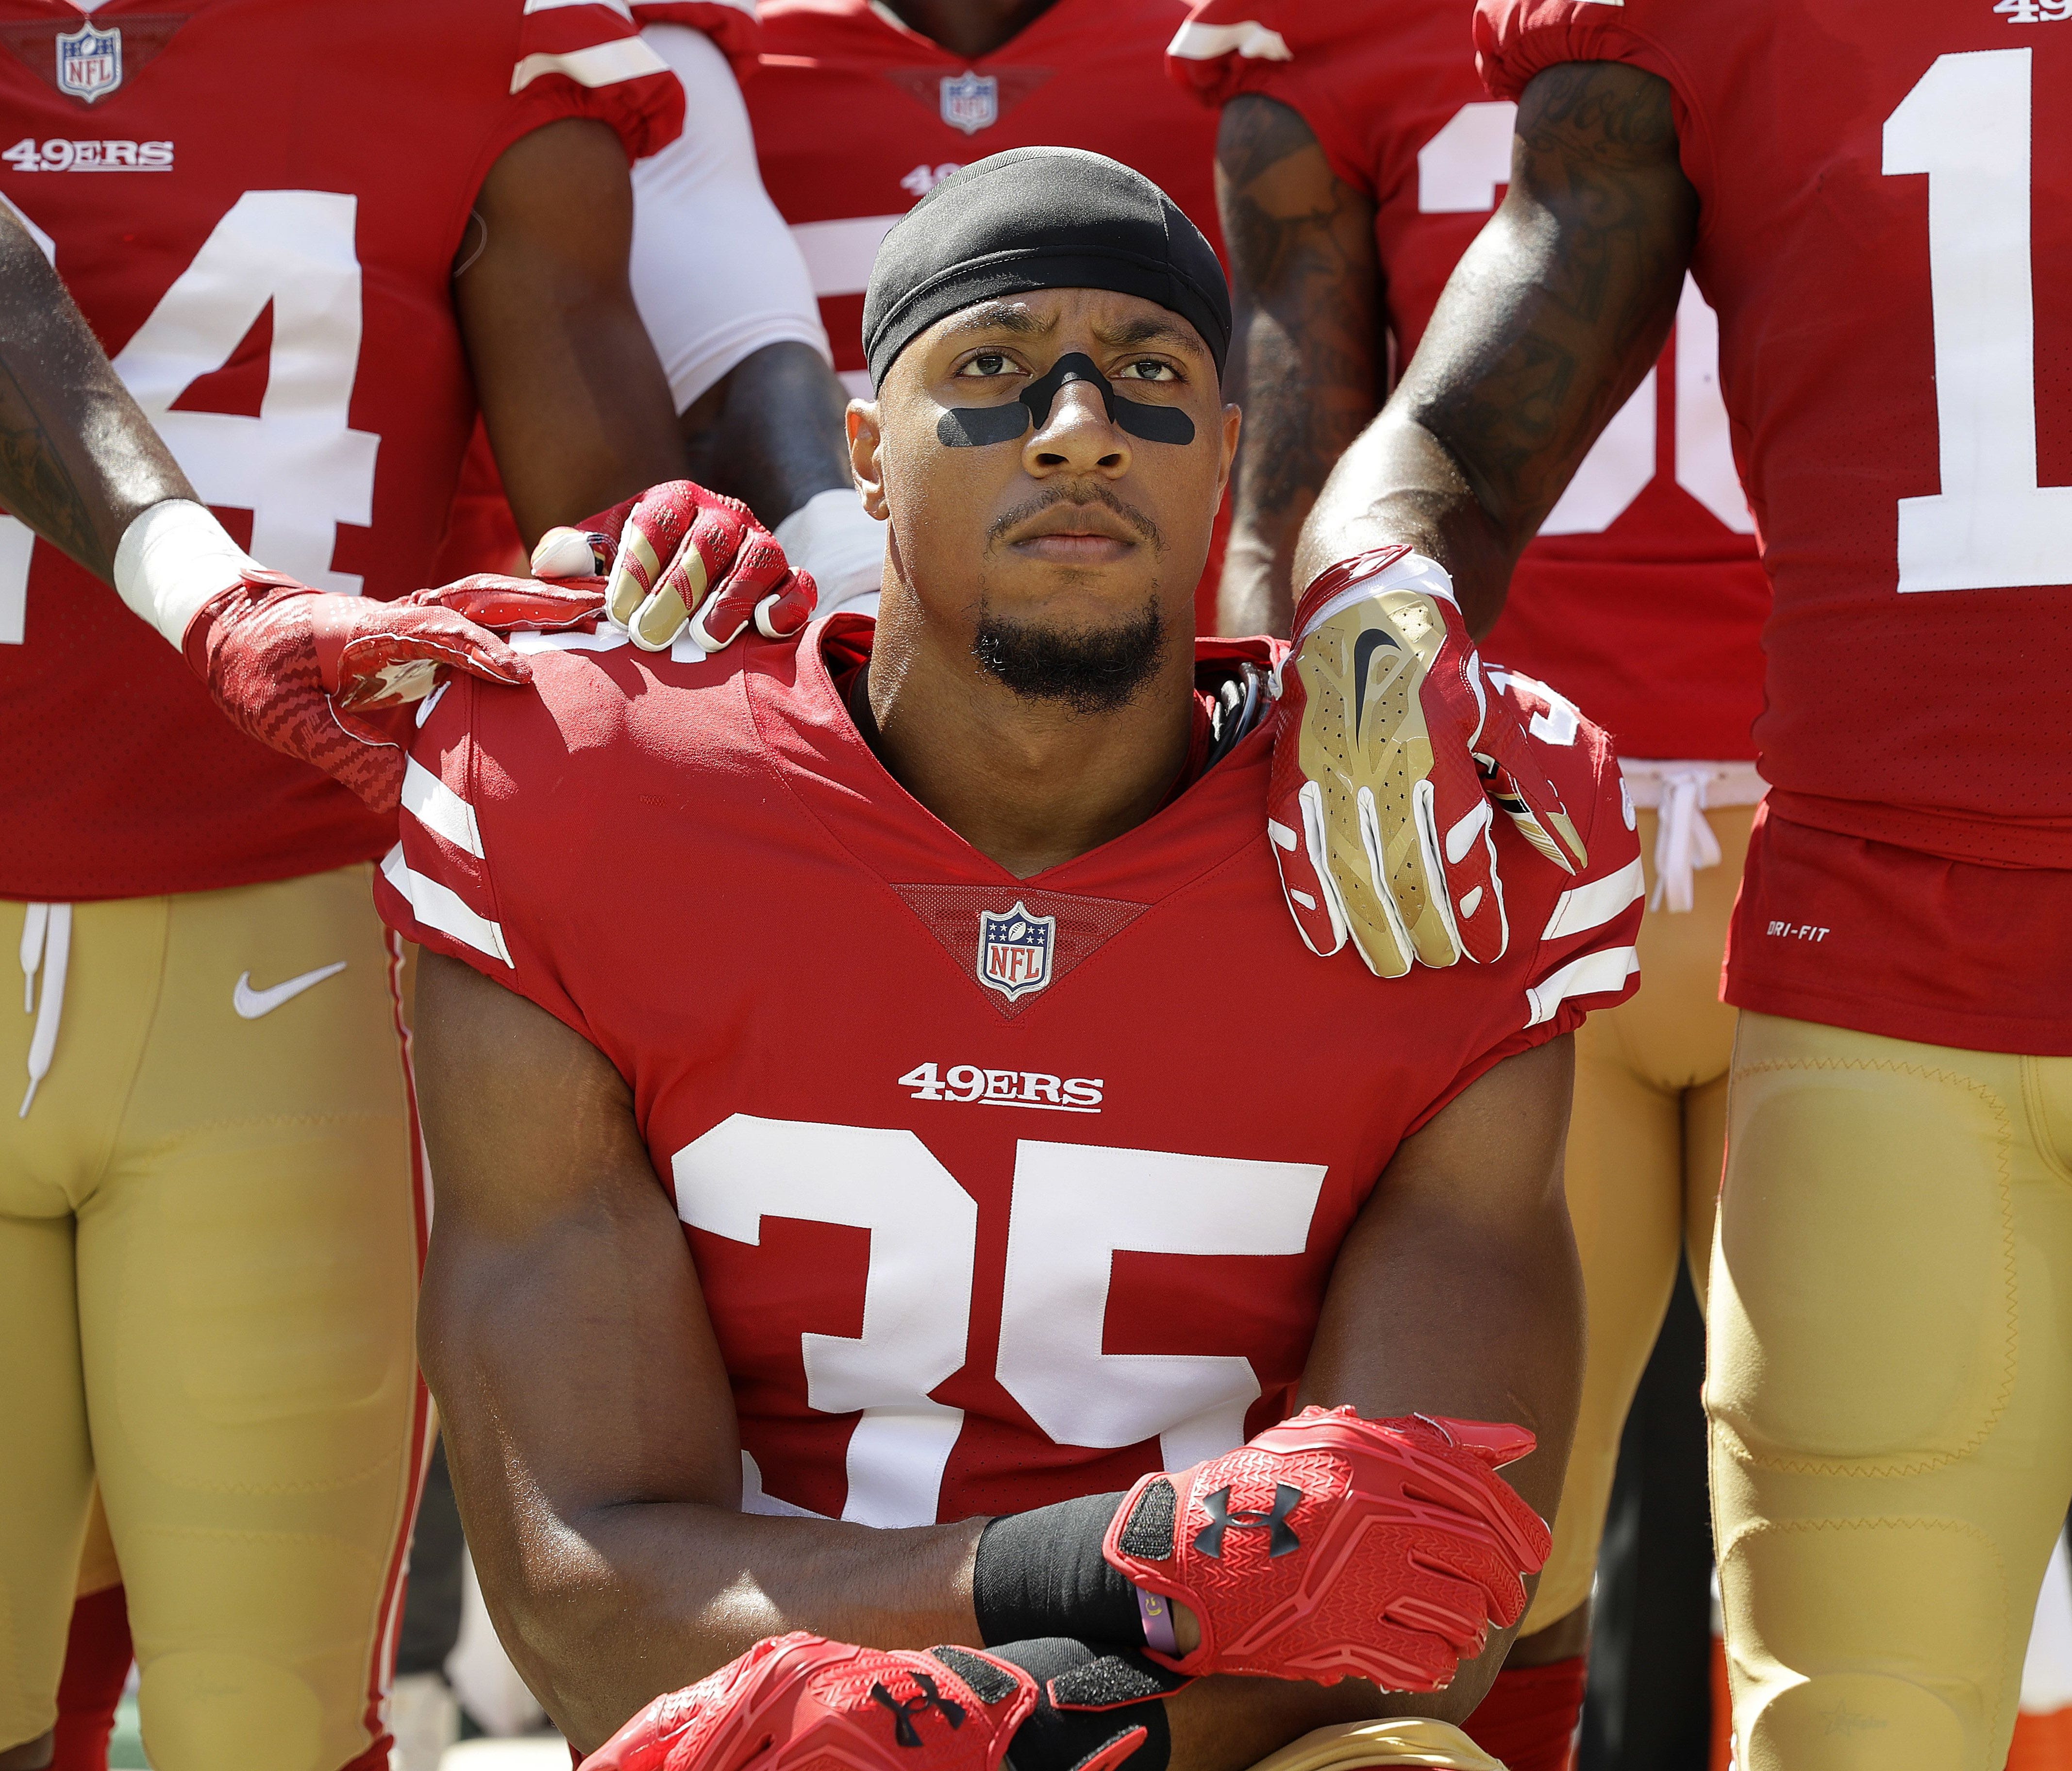 San Francisco 49ers safety Eric Reid (35) kneels in front of teammates during the playing of the national anthem before an NFL football game between the 49ers and the Carolina Panthers in Santa Clara, Calif., Sunday, Sept. 10, 2017.